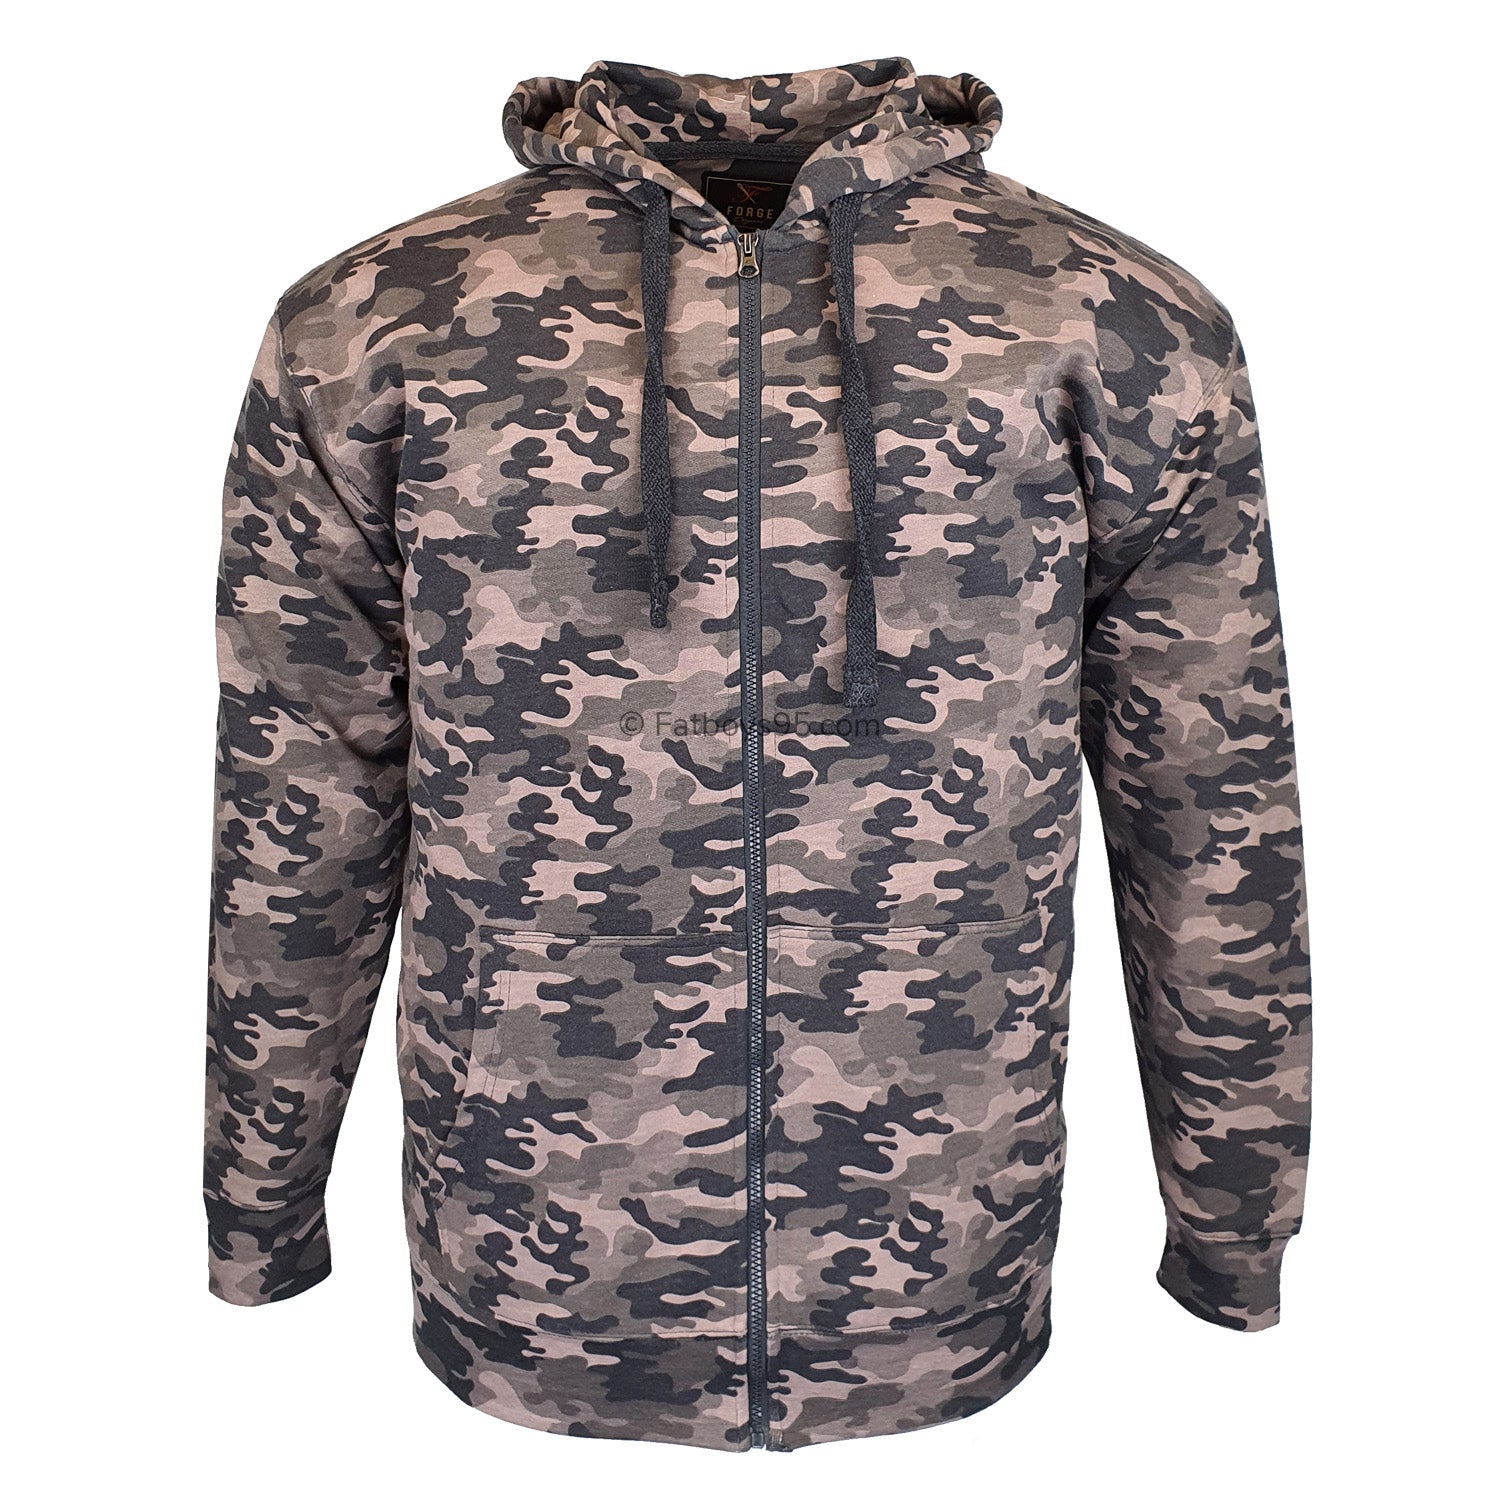 Forge Allover Camo Print Hoody - FBS 508 - Charcoal 1